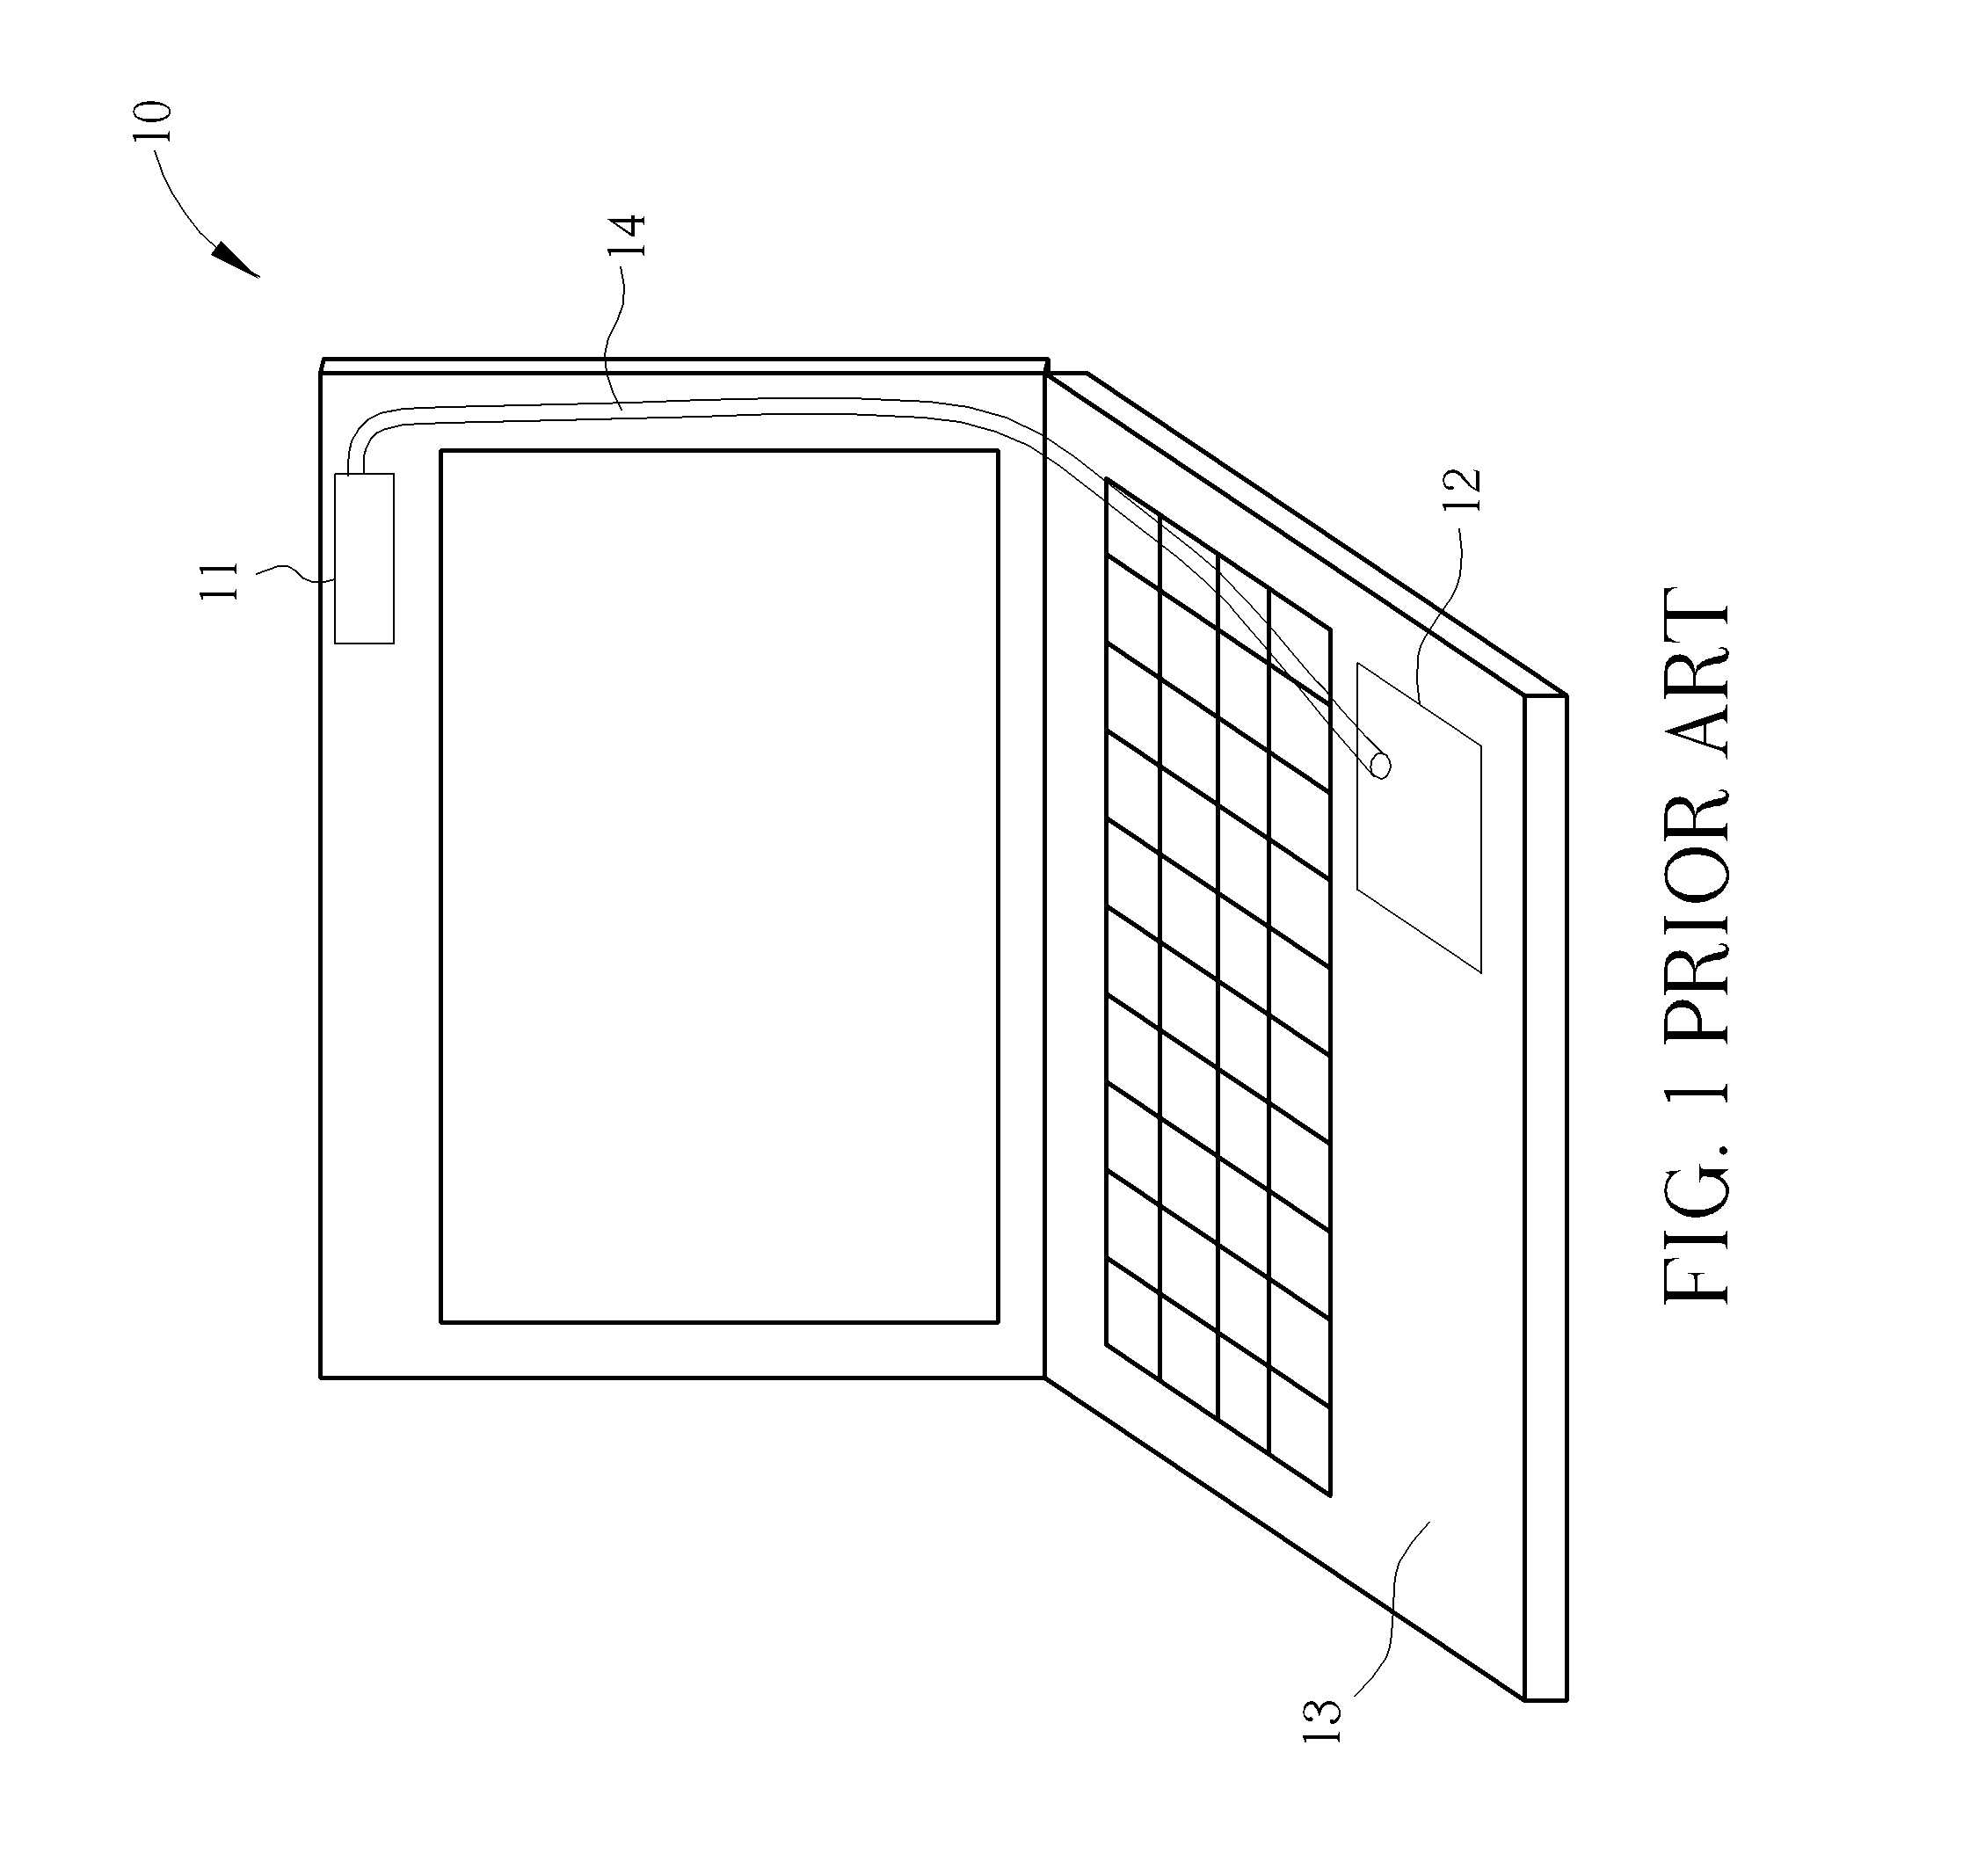 Dipole Antenna and Radio-Frequency Device